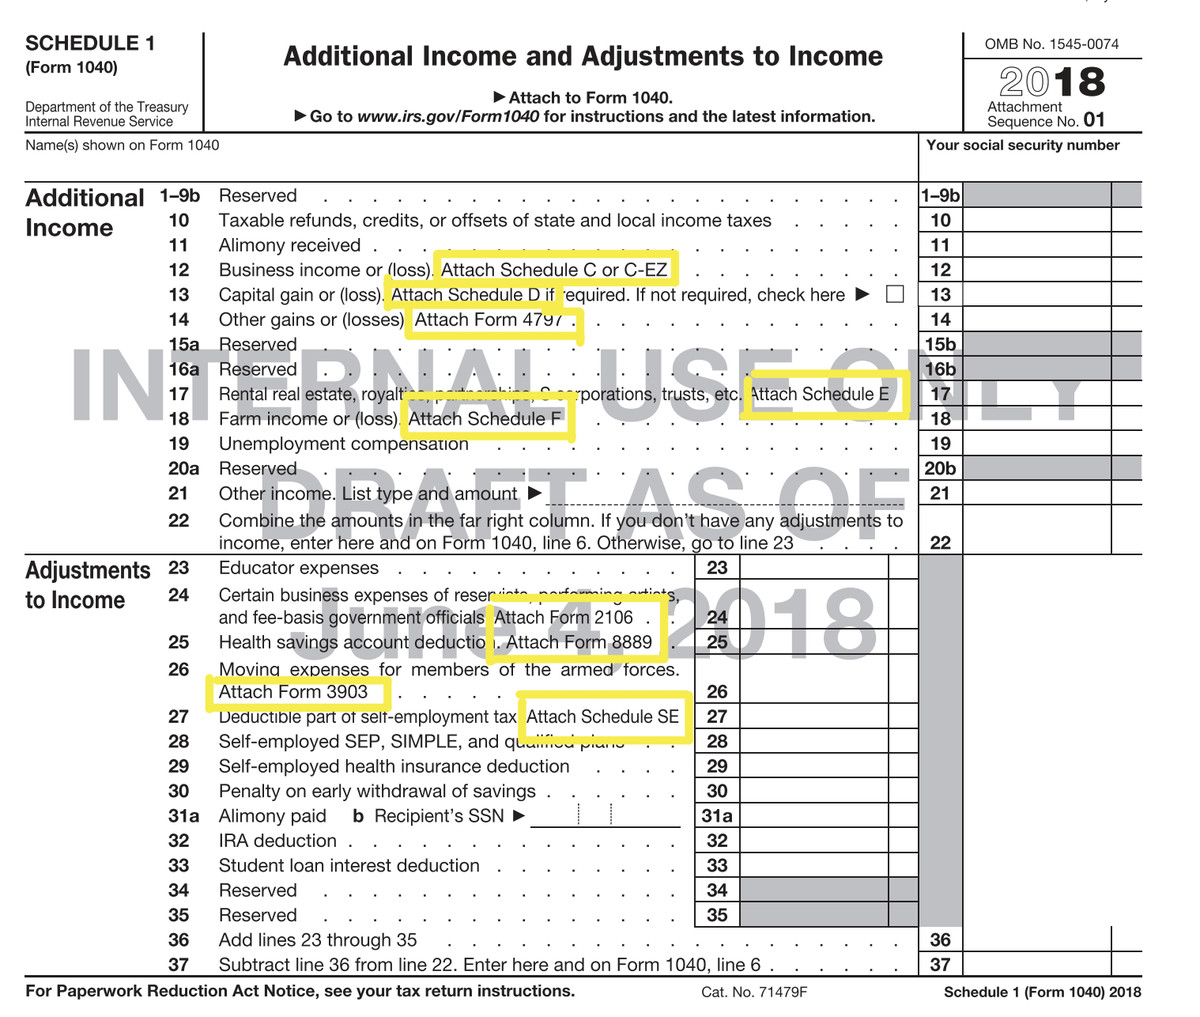 The Gop Tax Postcard Requires 6 Extra Forms  Vox Within Tax Return Worksheet